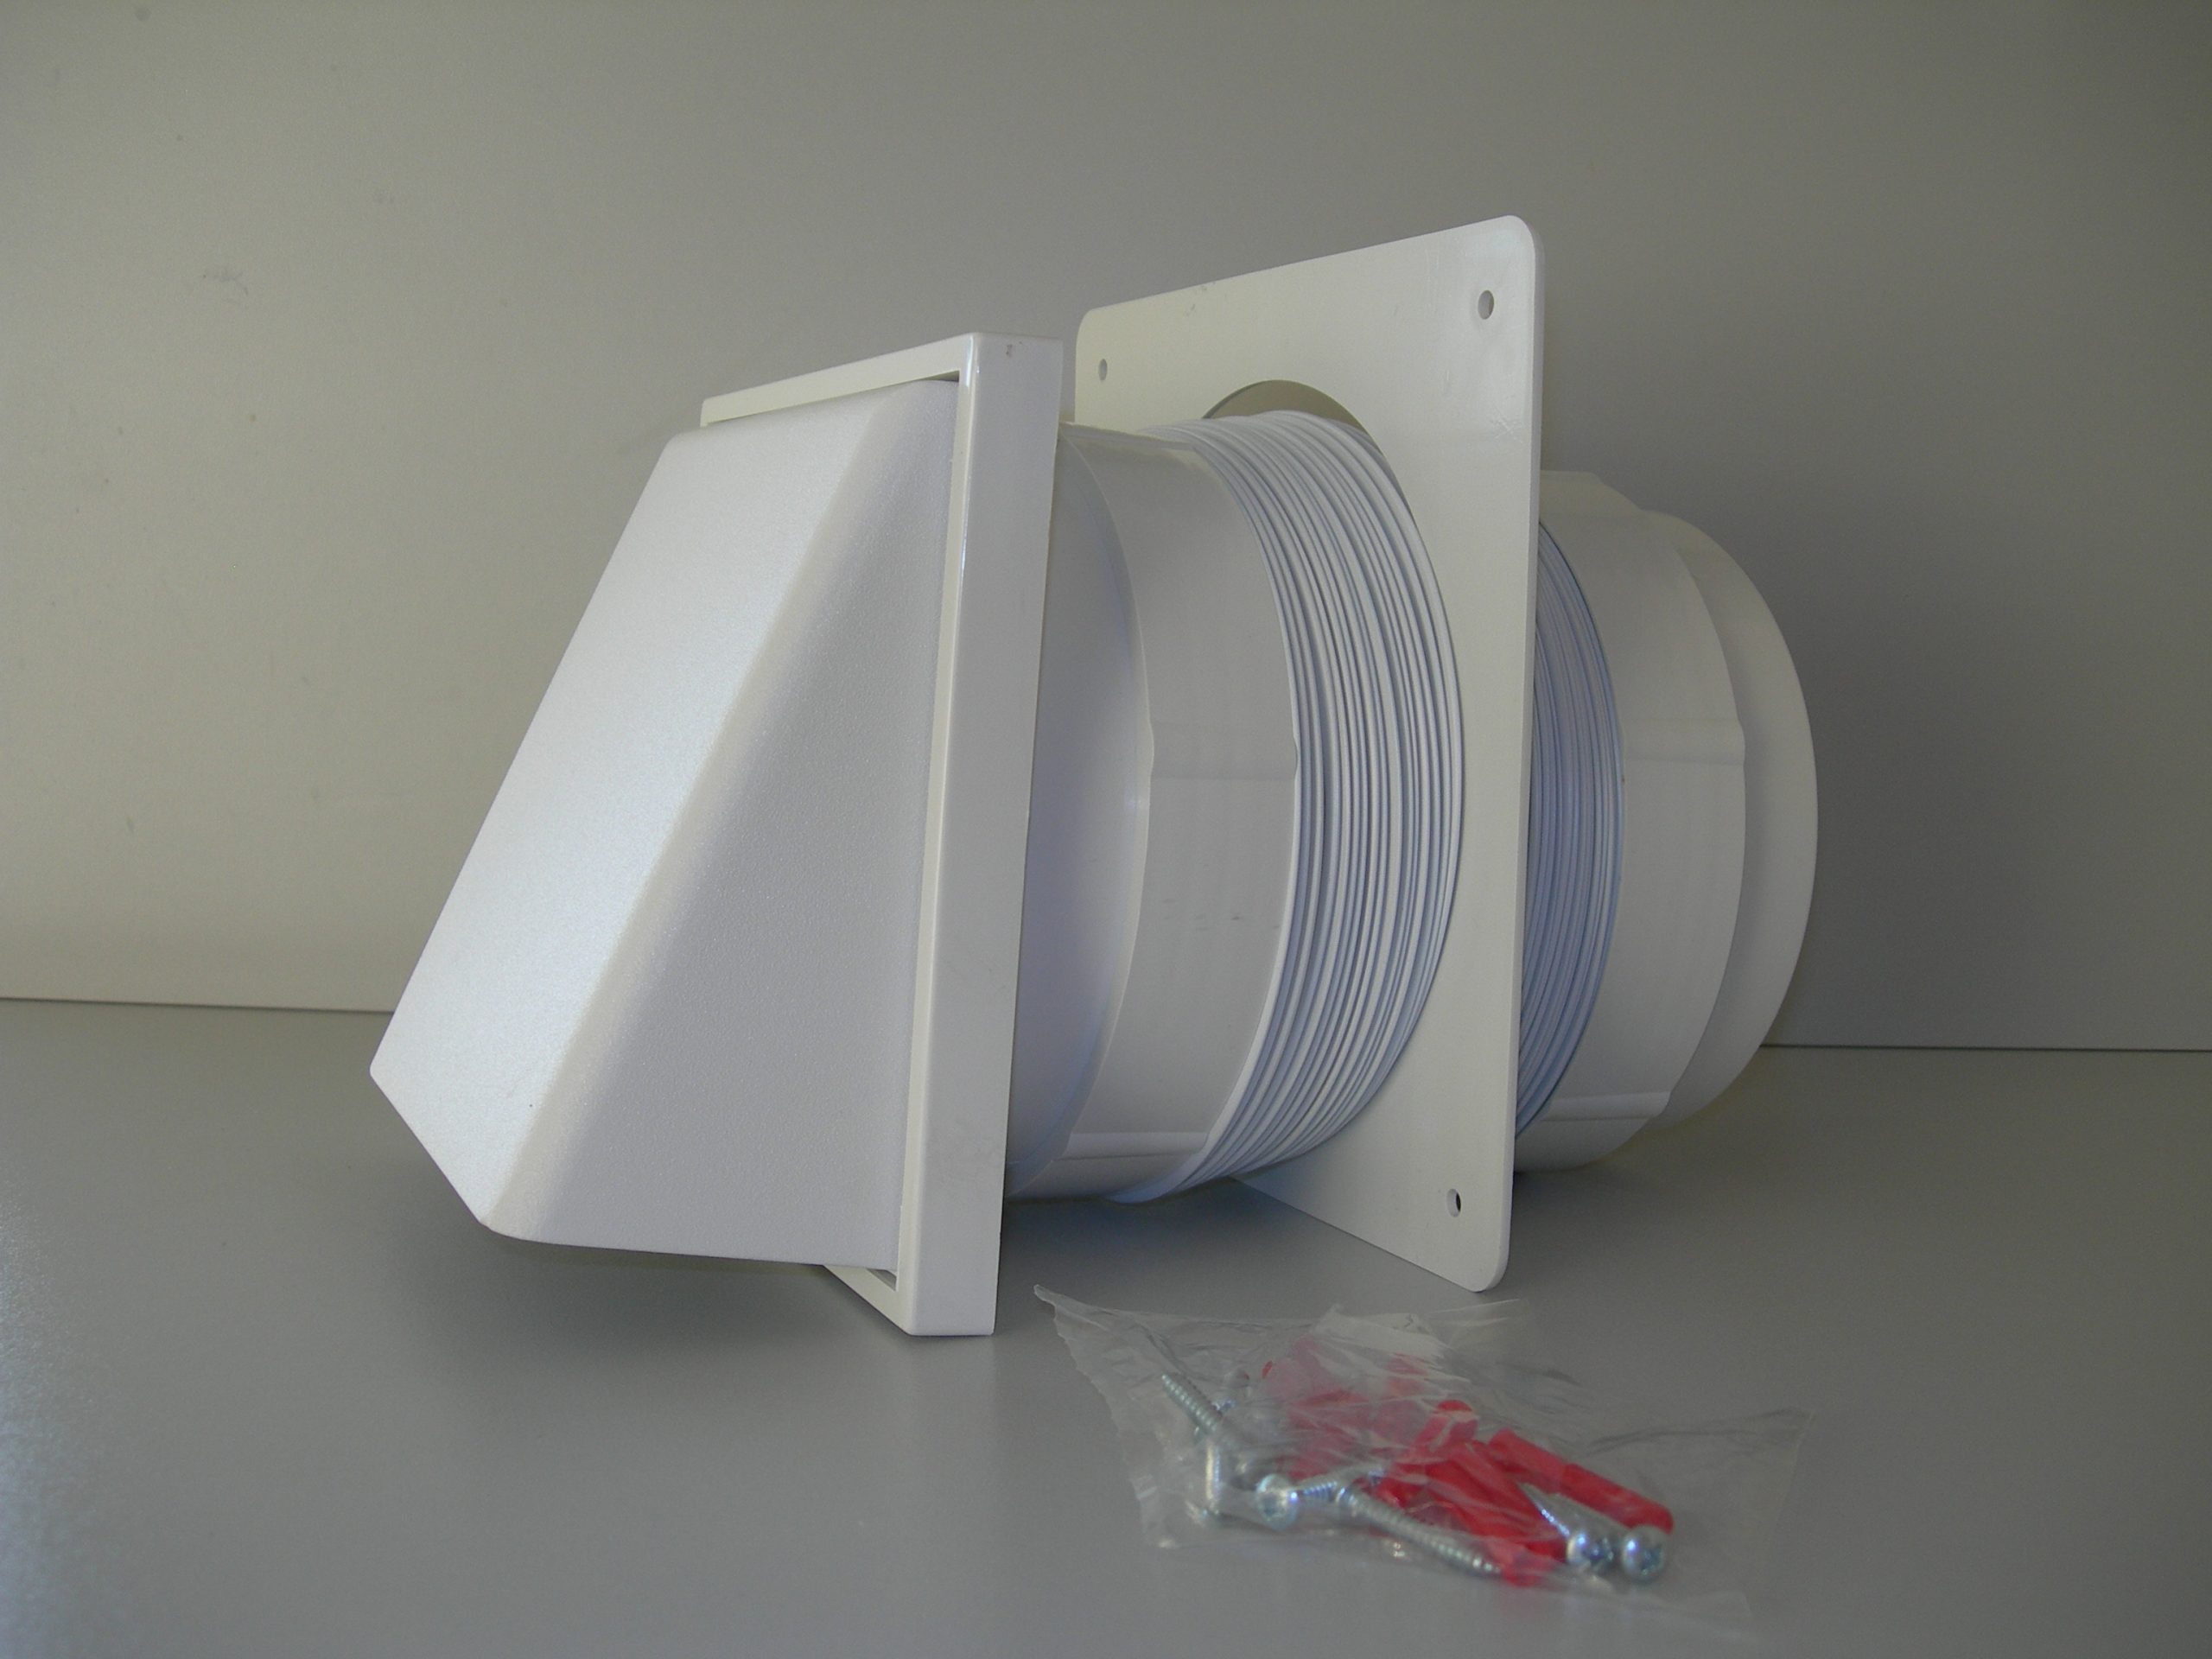 Details About Manrose Cowled Wall Grille Ventilation Kit Extraction Fan Plastic Ducting 7202w for dimensions 3072 X 2304